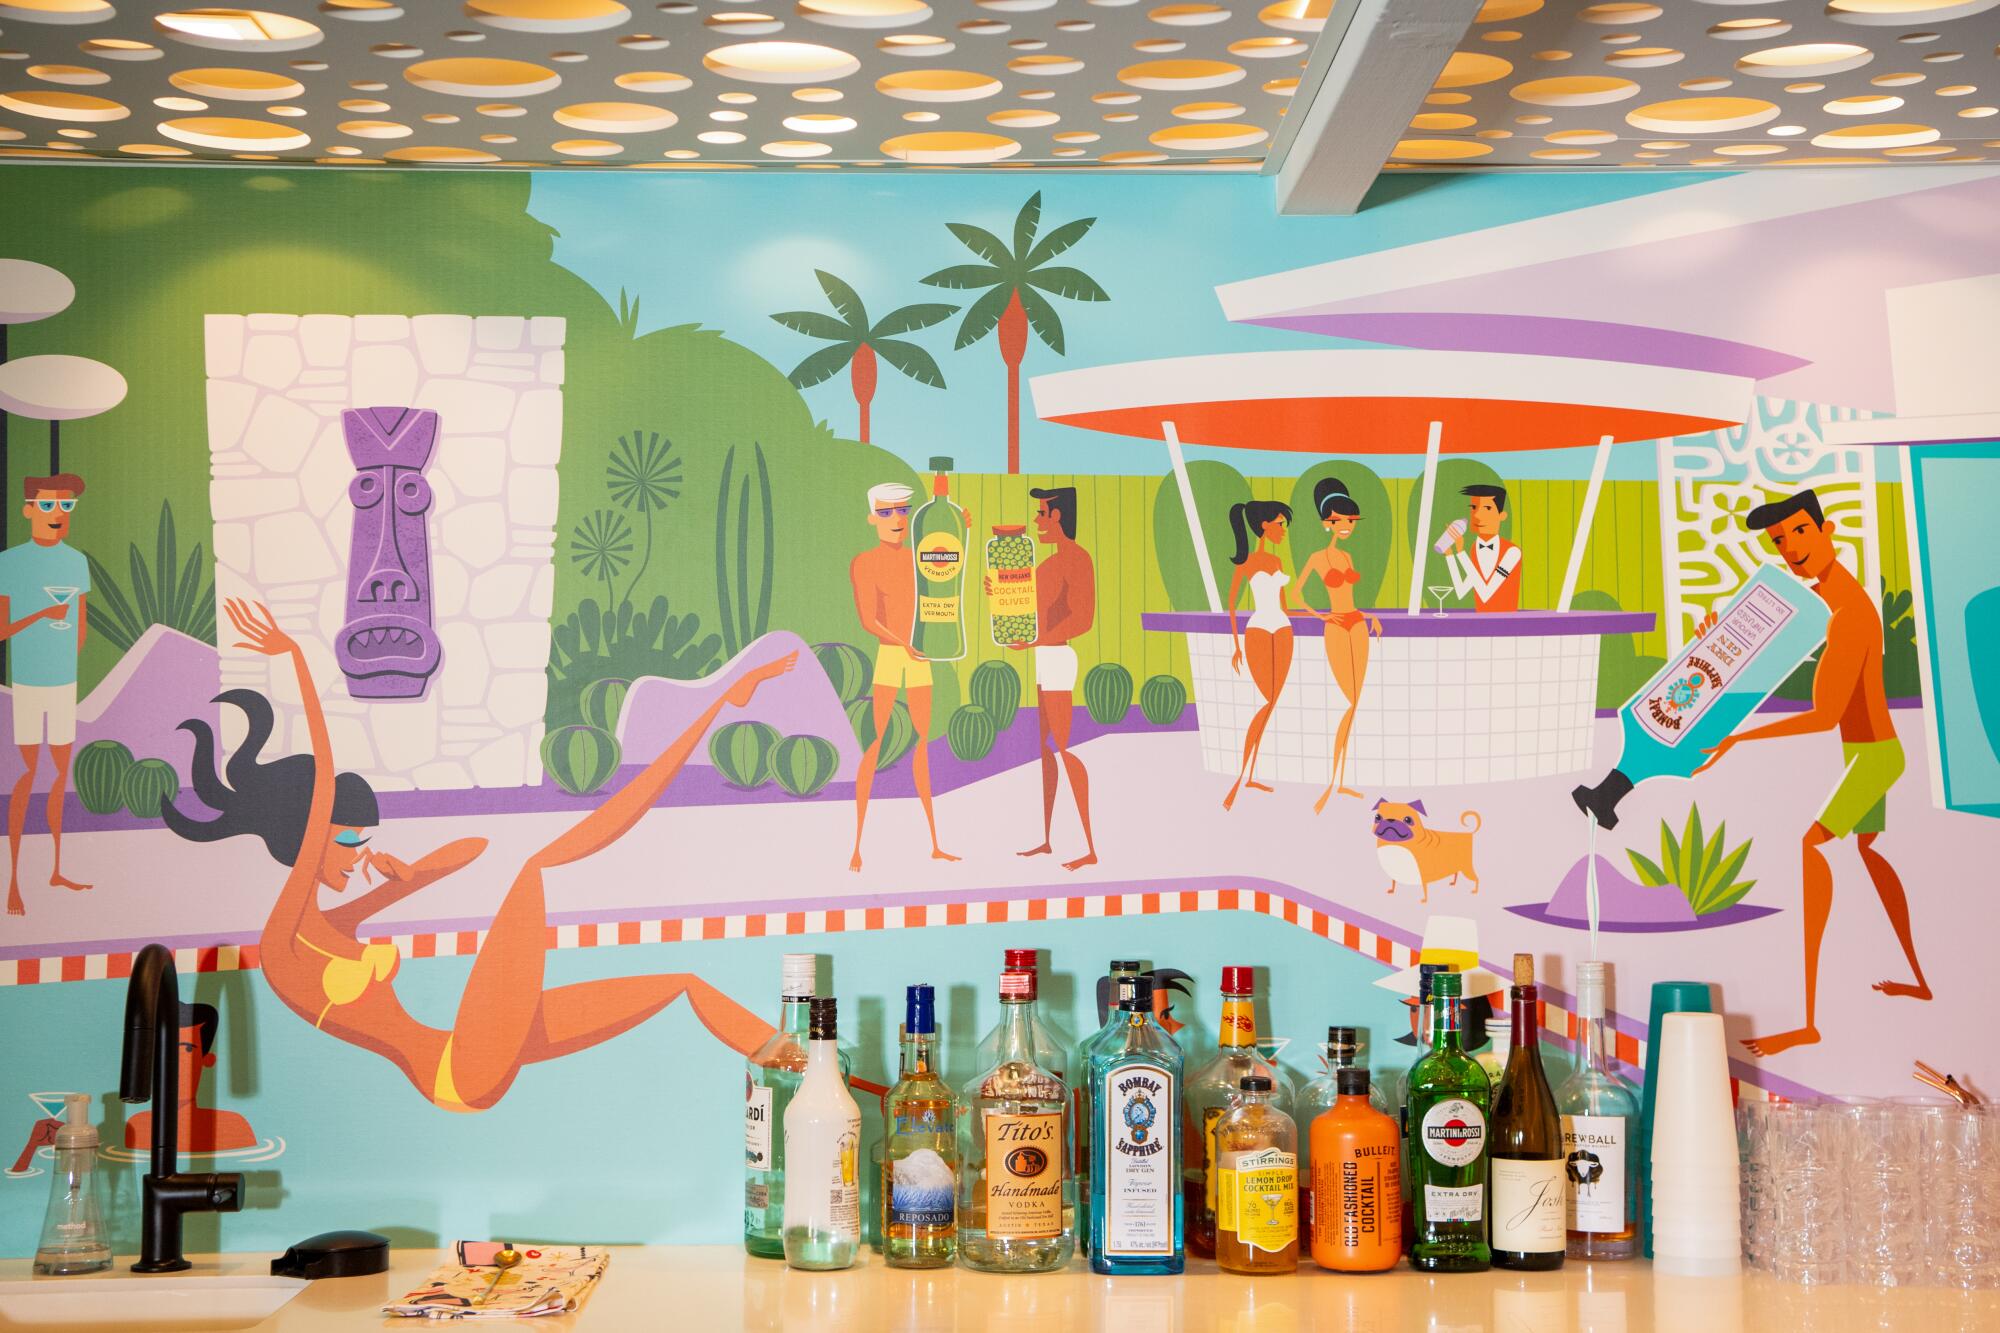 A mural behind a line of liquor bottles depicts a pool party with a woman falling into the water.